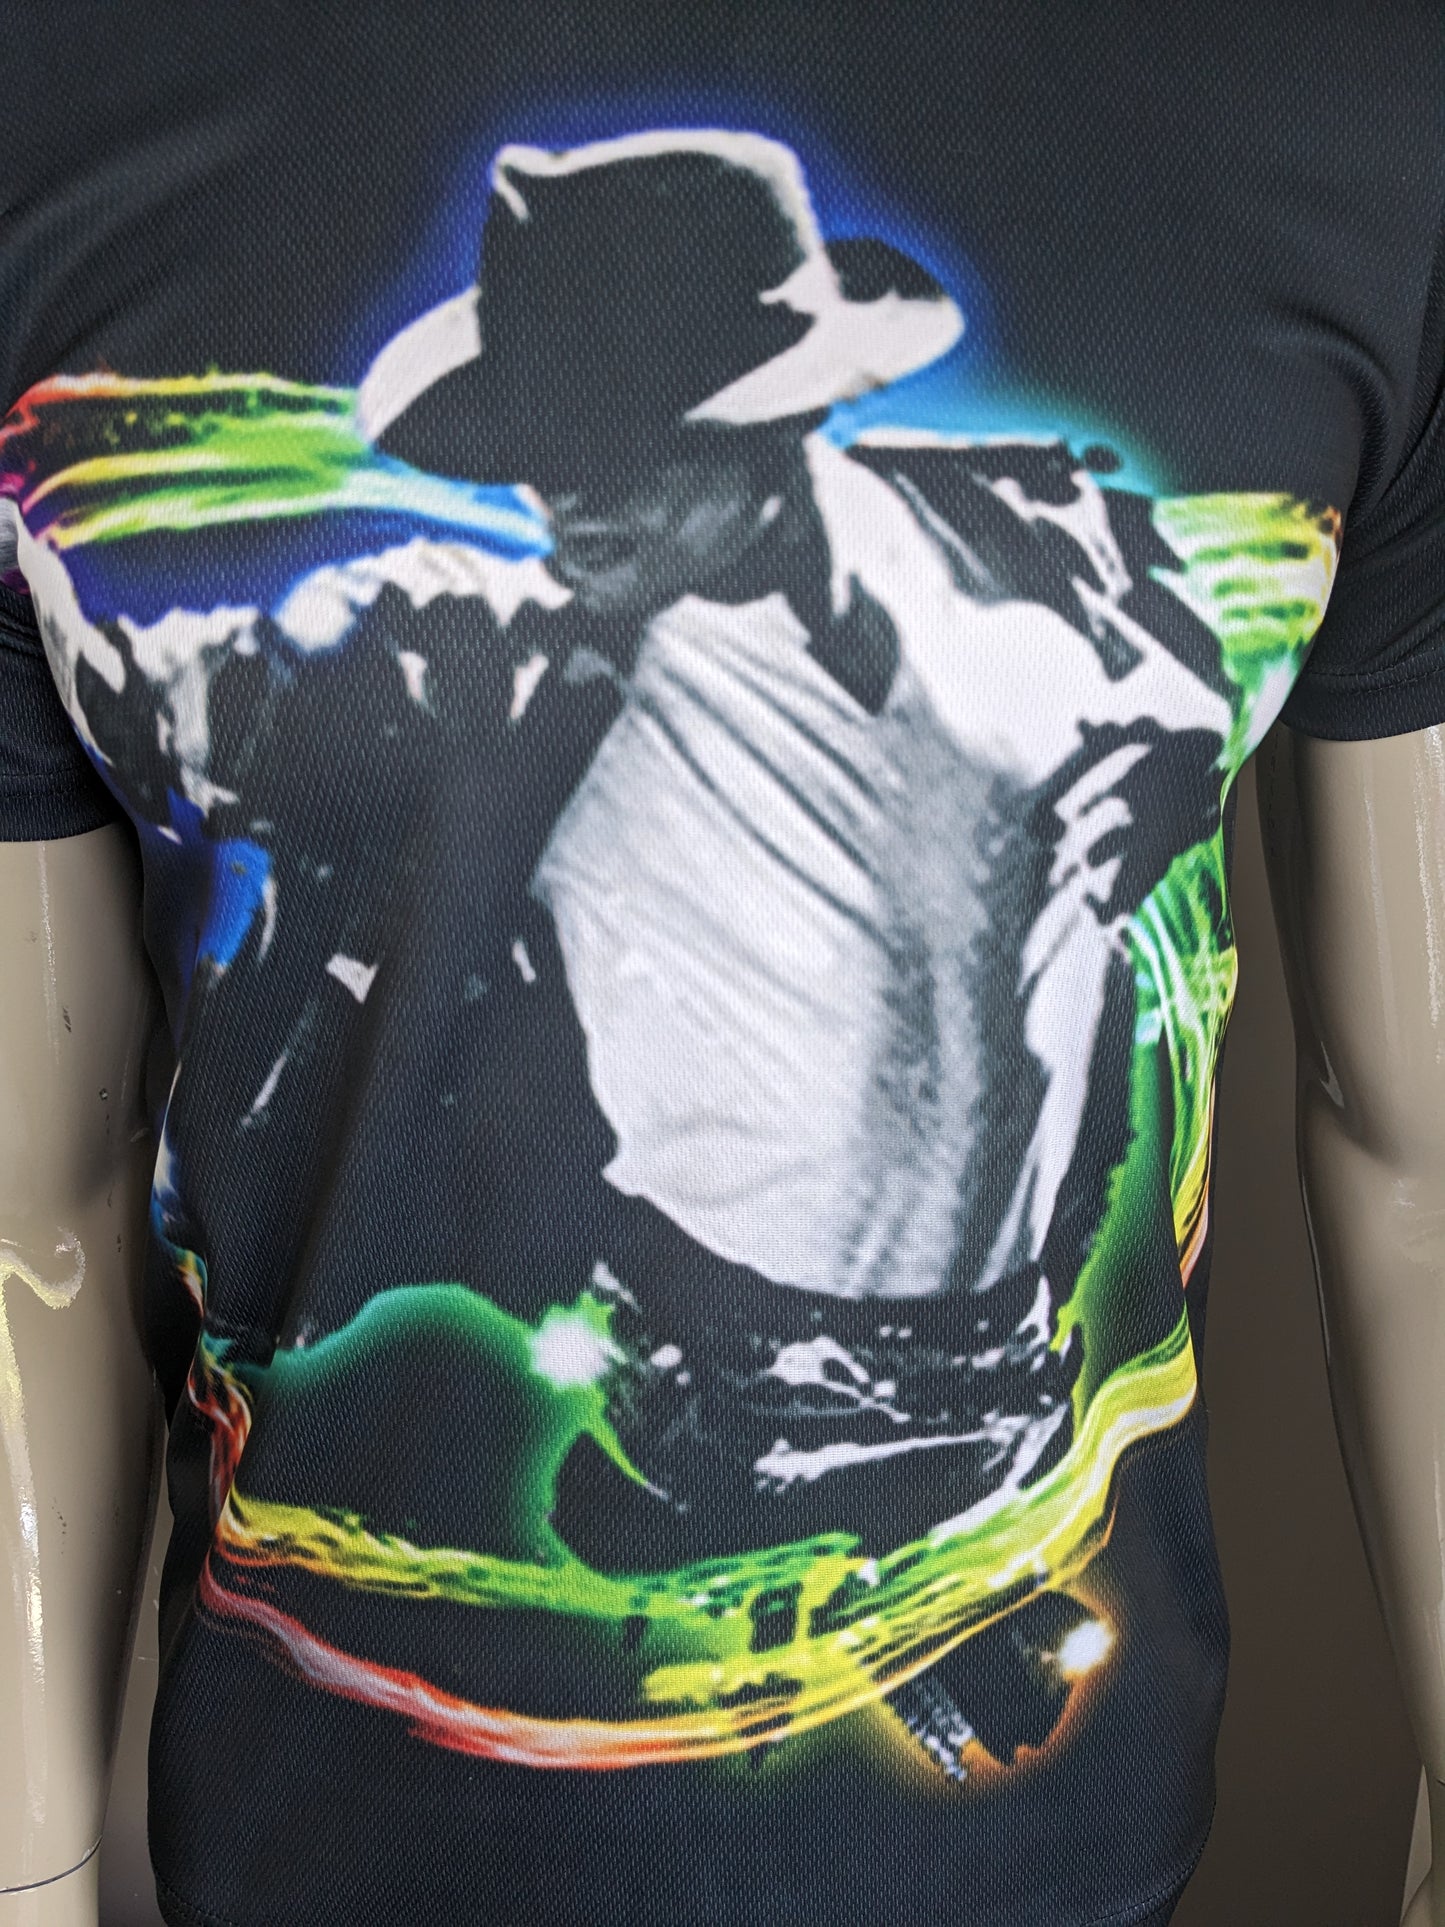 Micheal Jackson Print Shirt. Black with colored print. Size S. Stretch.